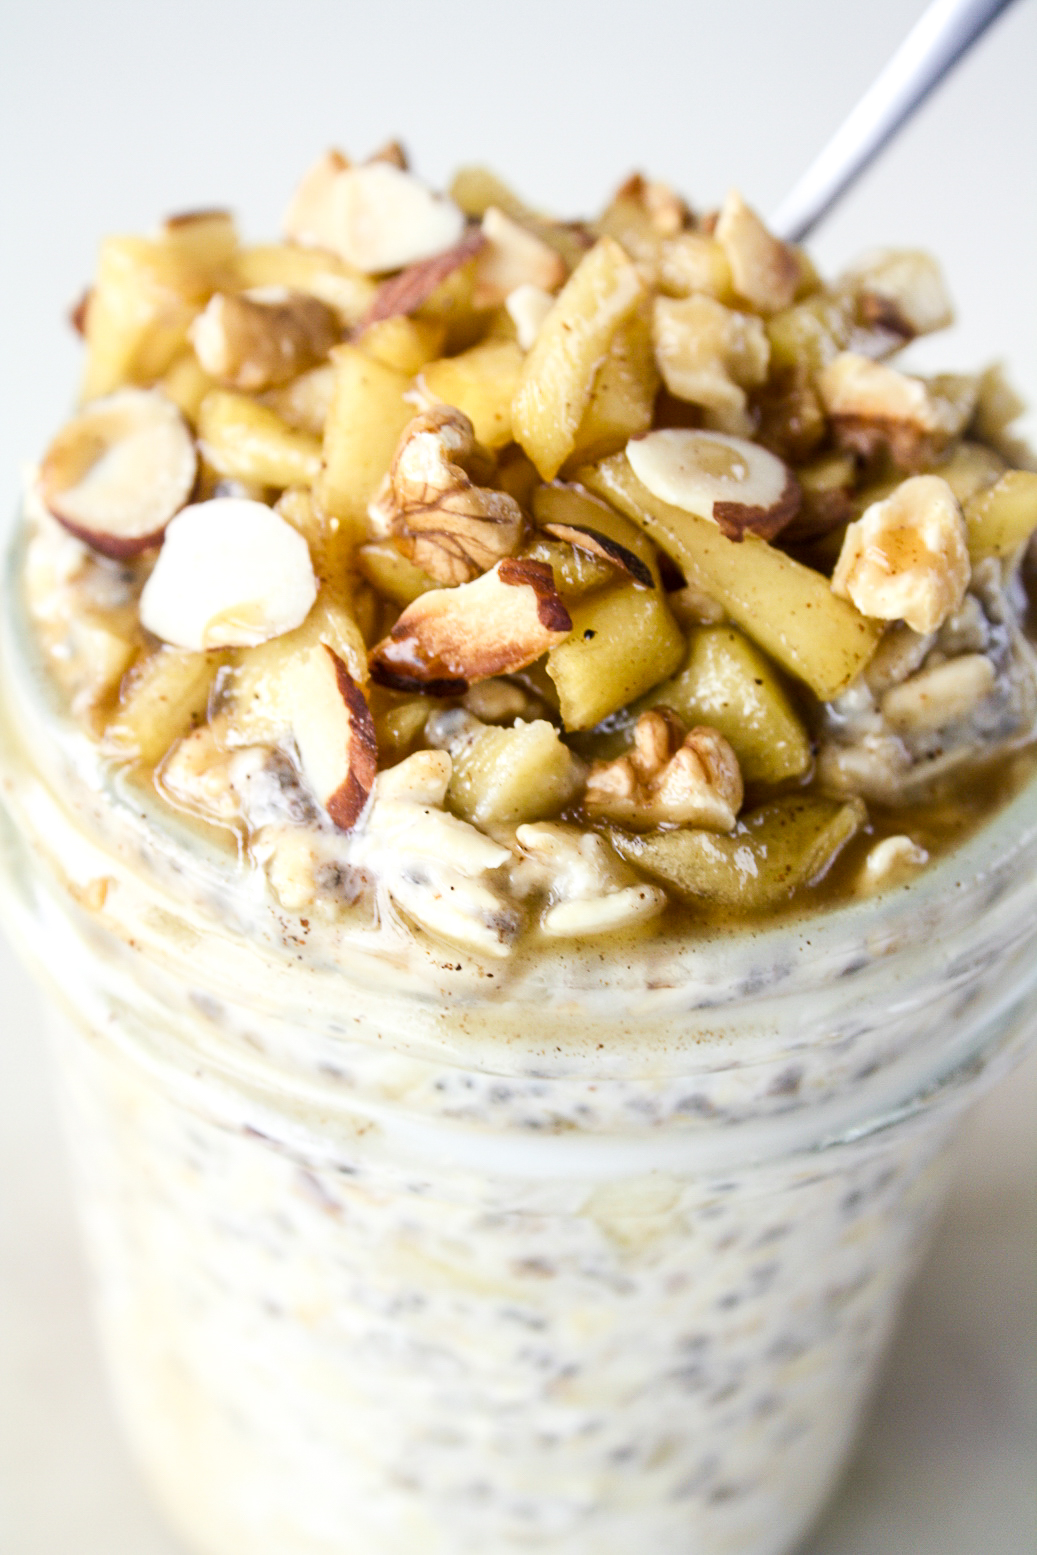 Creamy overnight oats with caramelised apples and toasted almonds and walnuts!